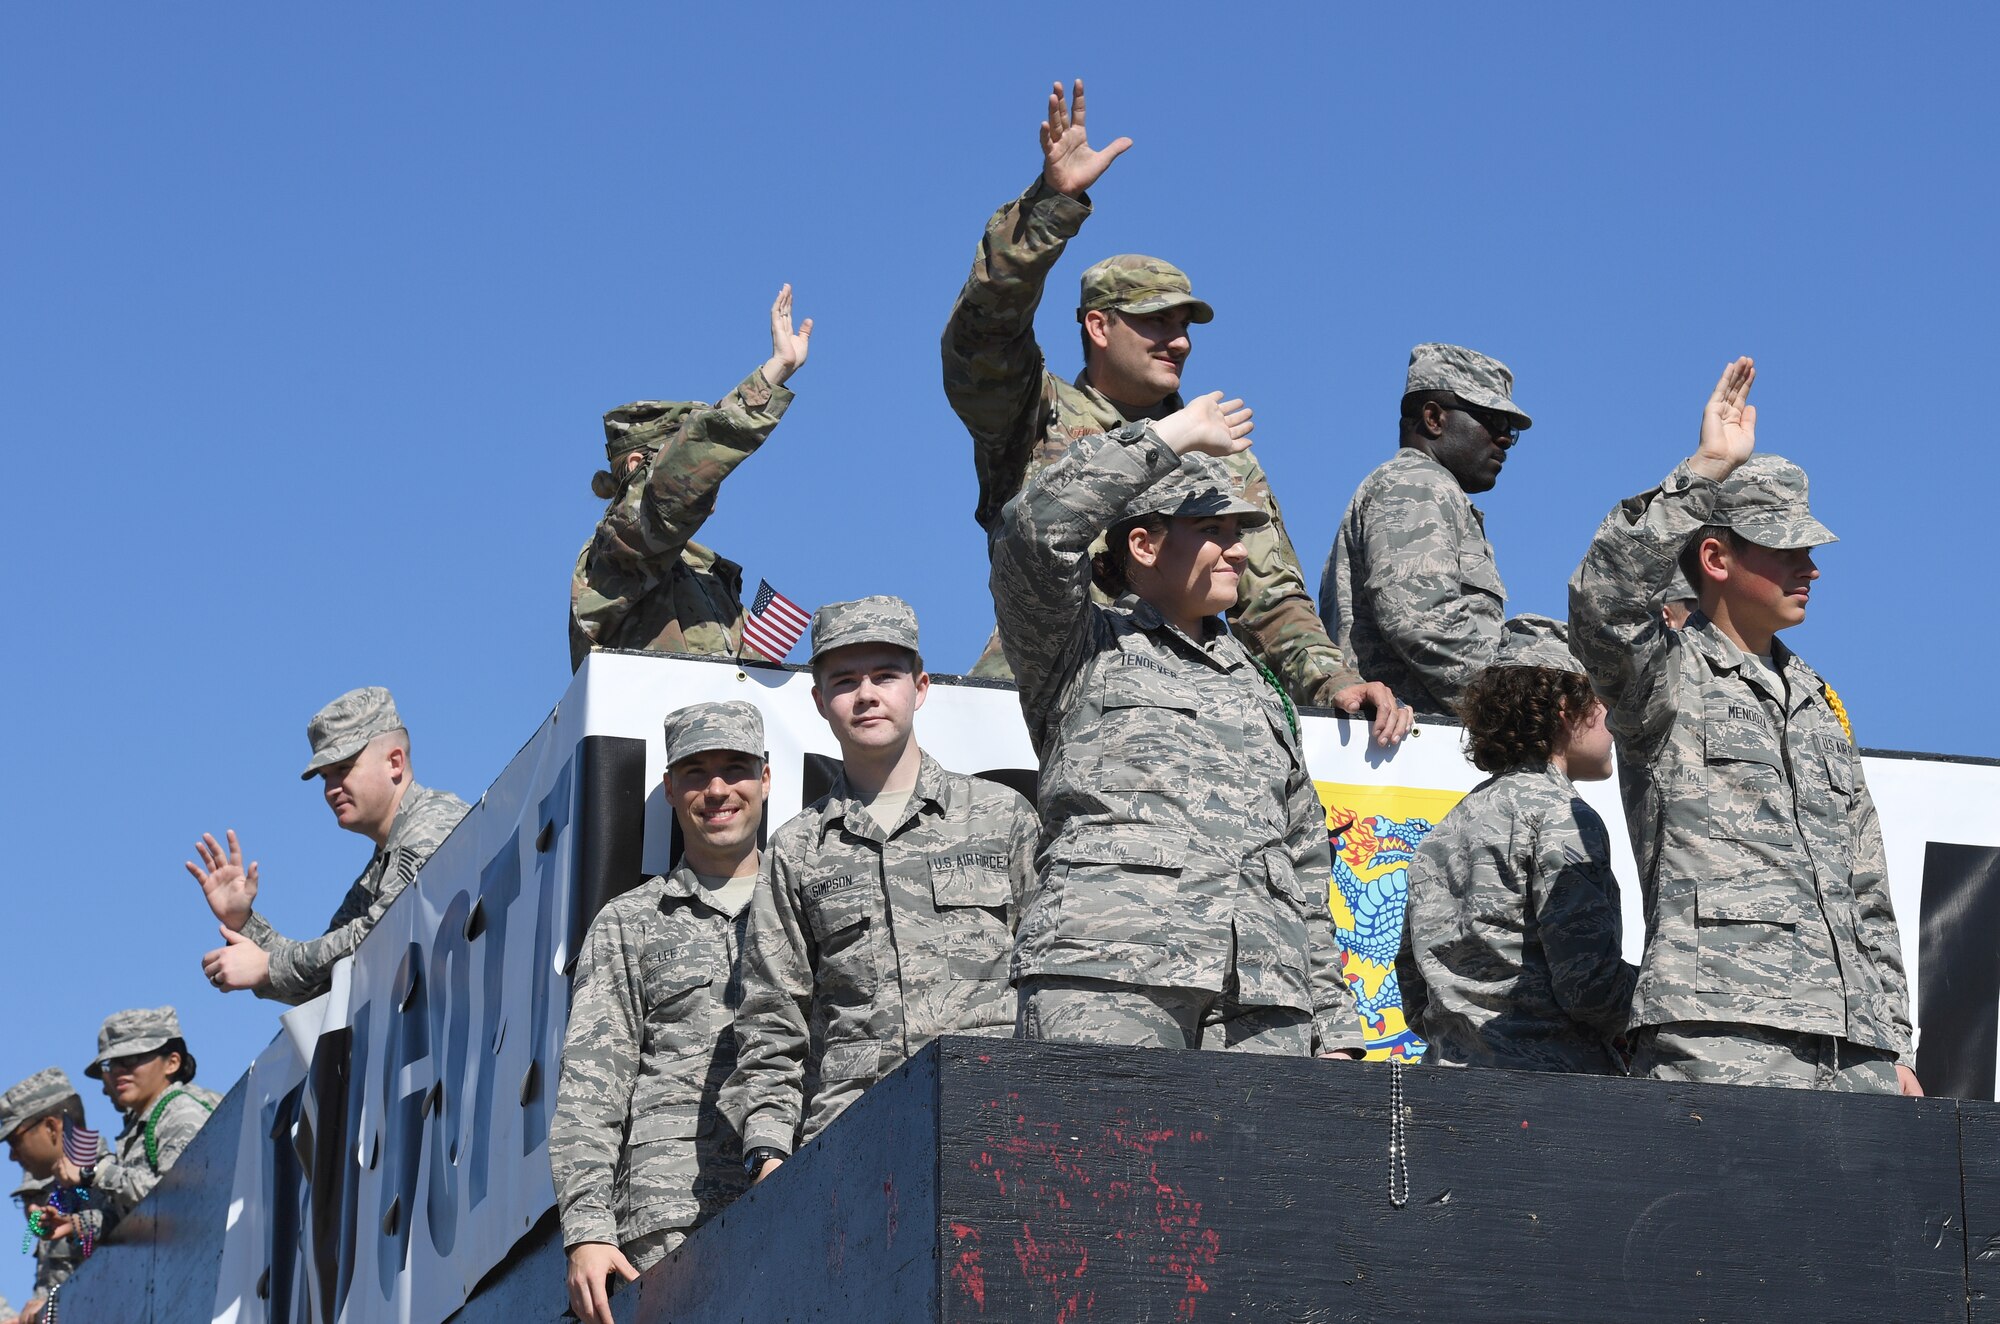 Airmen from the 81st Training Group ride in a float during the 19th Annual Gulf Coast Veterans Day Parade in DíIberville, Mississippi, Nov. 9, 2019. Keesler Air Force Base leadership, along with hundreds of Airmen, attended and participated in the parade in support of all veterans past and present. More than 70 unique floats, marching bands and military units marched in the largest Veterans Day parade on the Gulf Coast. (U.S. Air Force photo by Kemberly Groue)